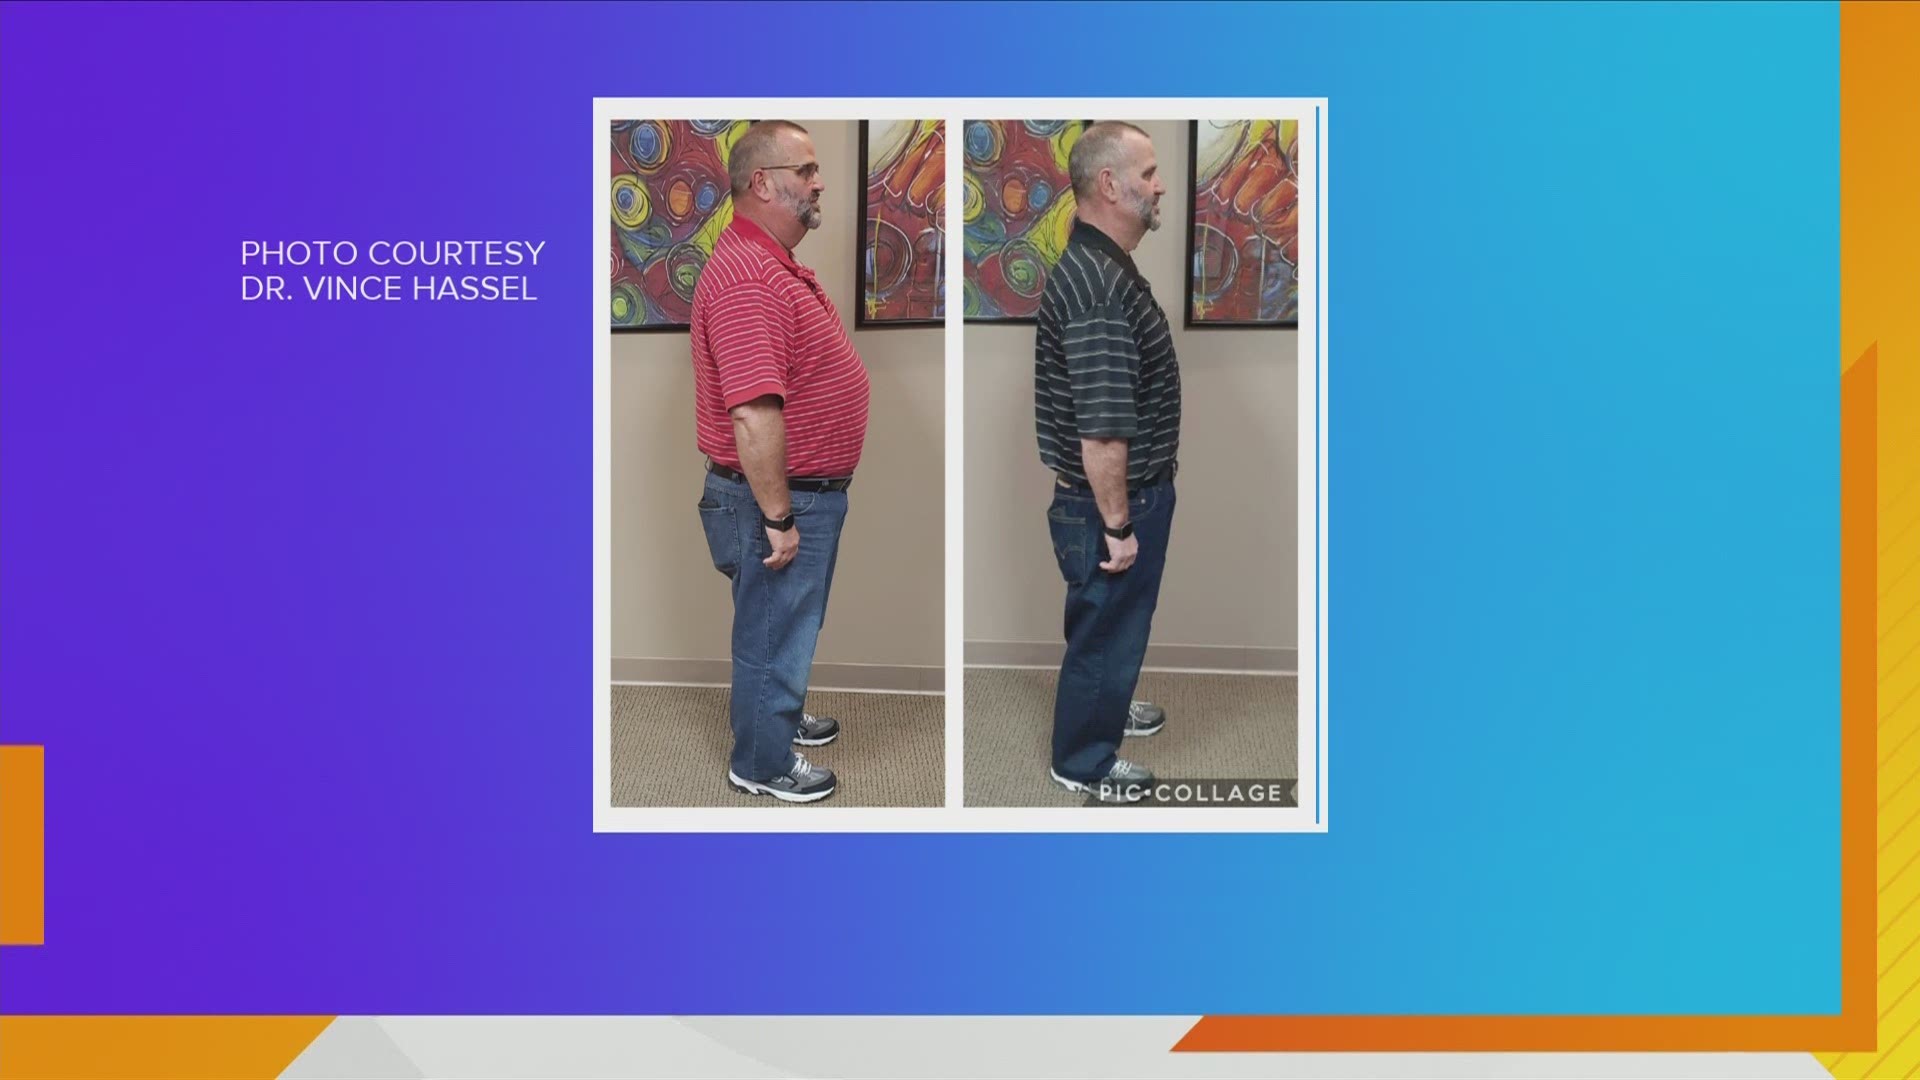 Des Moines man loses 70lbs after completing 2 rounds of Dr. Hassel's program | PAID CONTENT